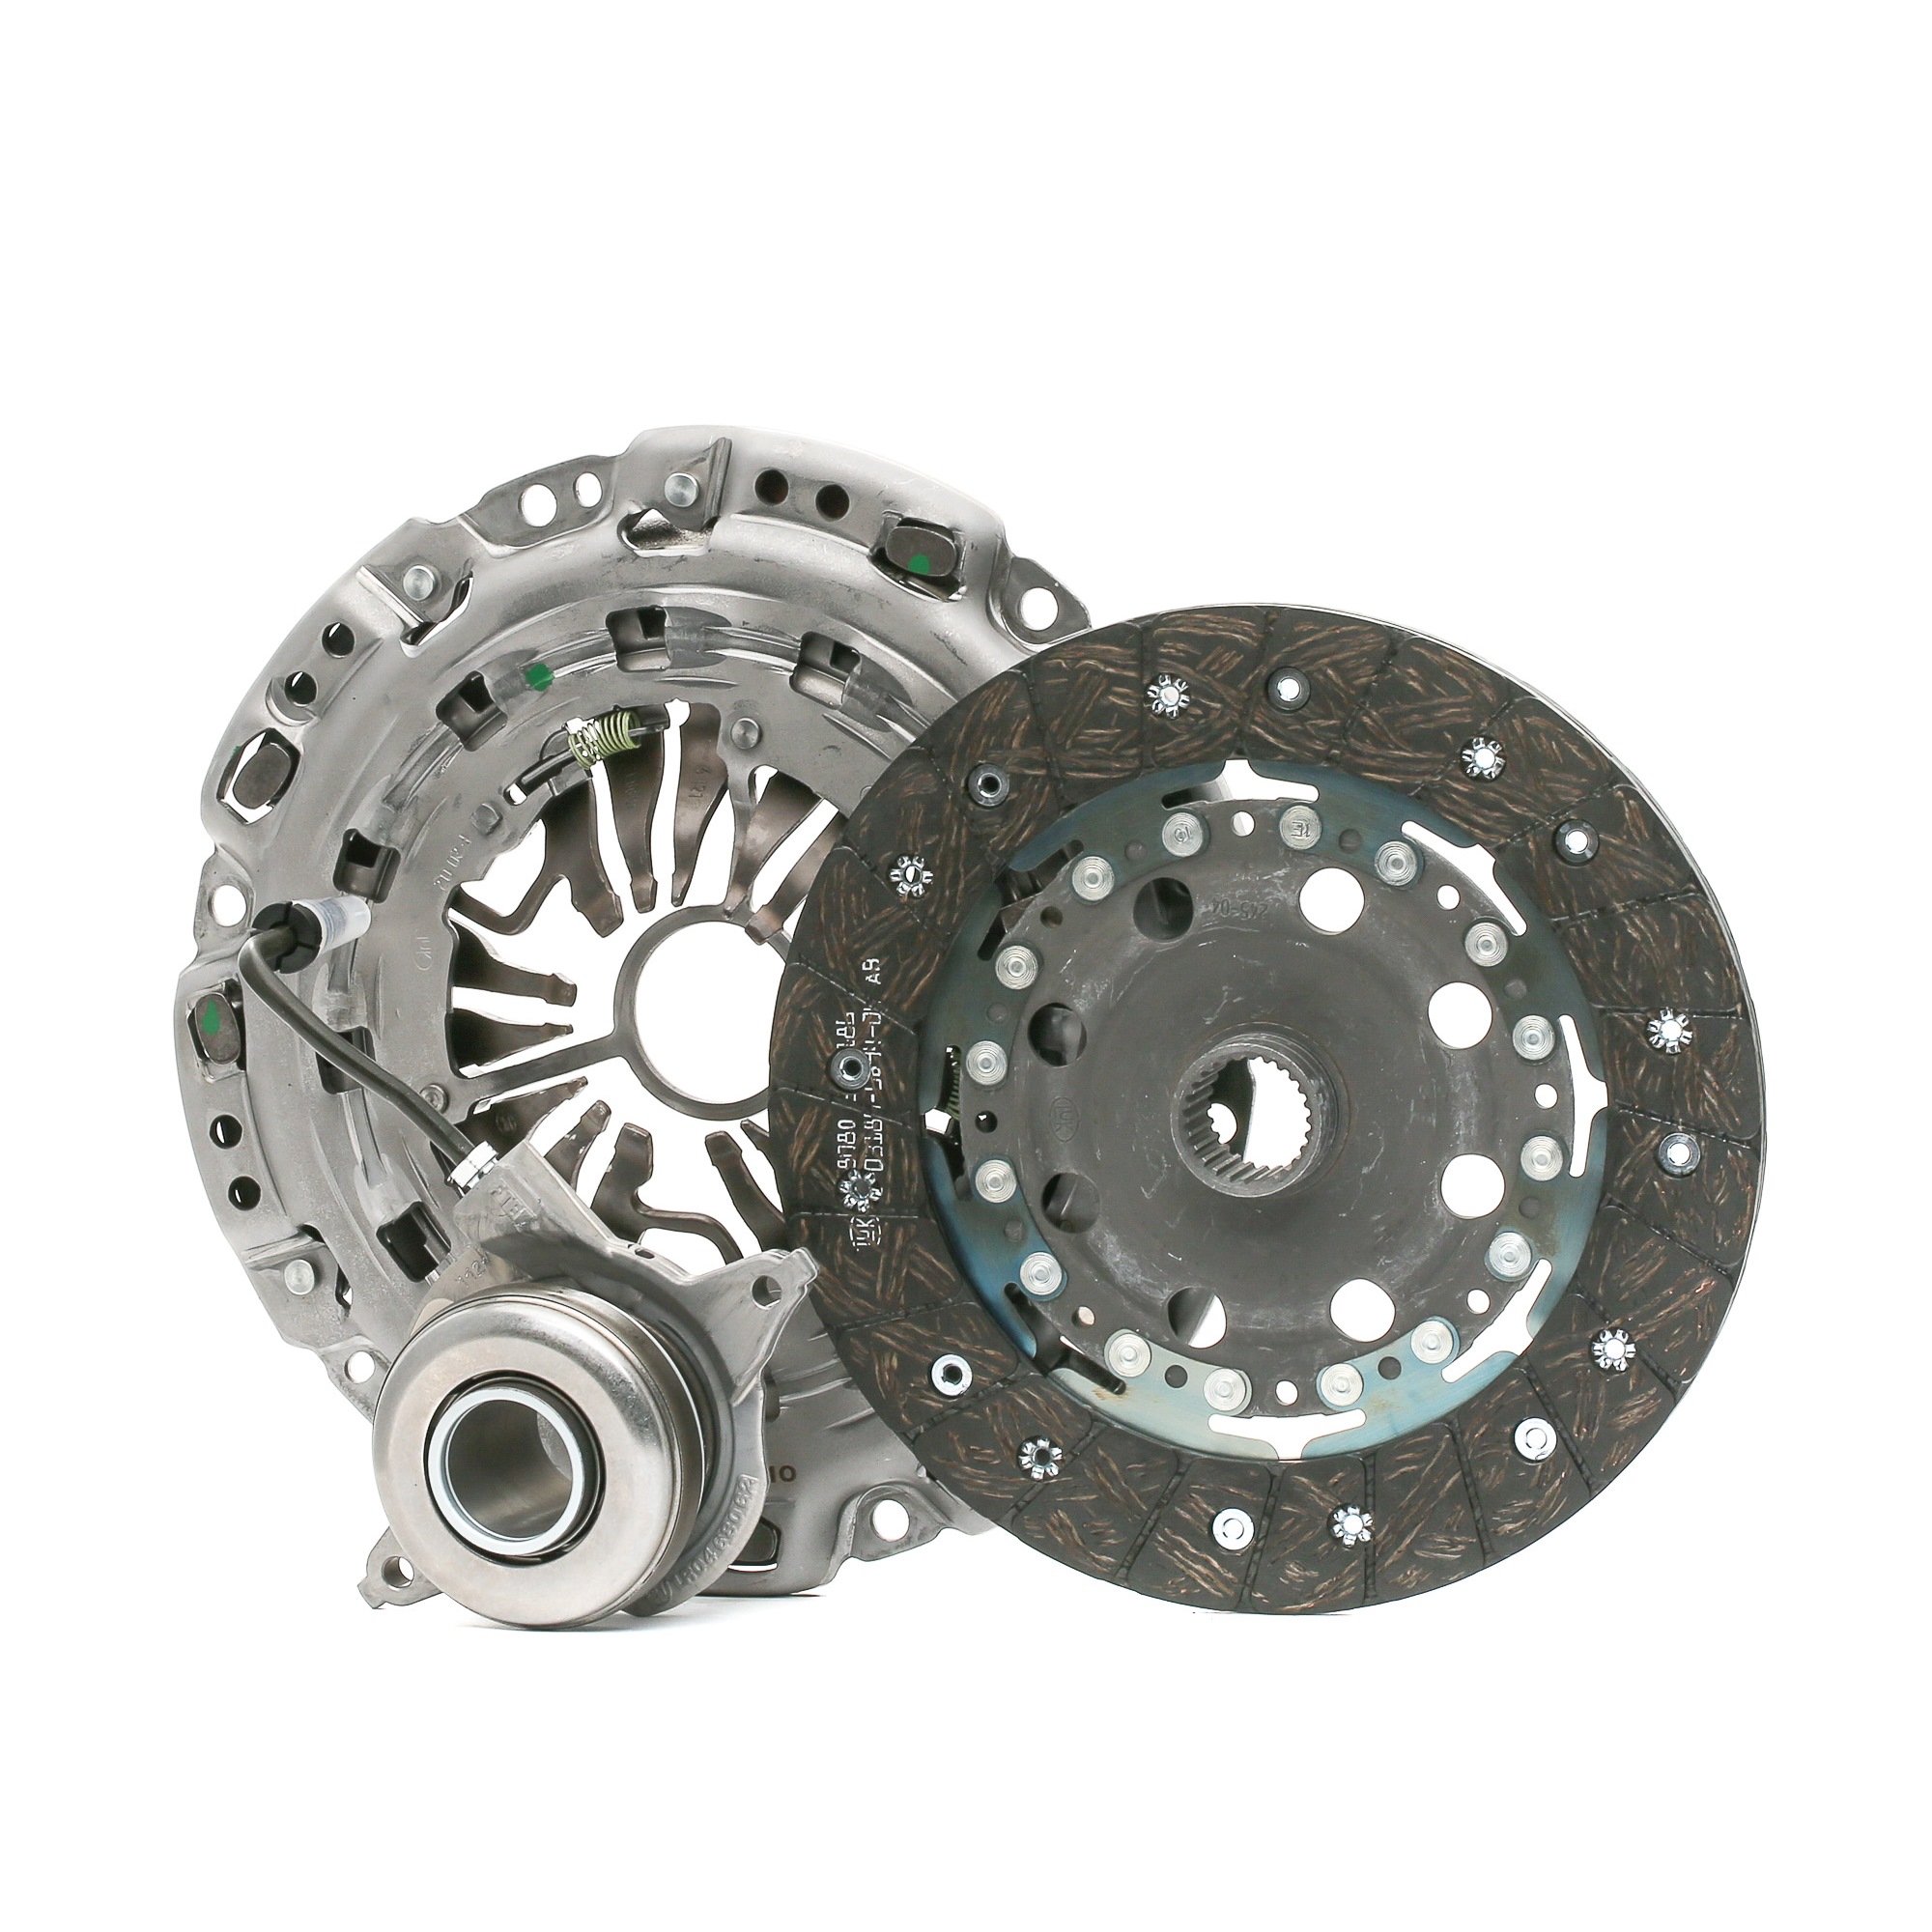 LuK for engines with dual-mass flywheel, with central slave cylinder, Requires special tools for mounting, Check and replace dual-mass flywheel if necessary., with automatic adjustment, 230mm Ø: 230mm Clutch replacement kit 623 3215 33 buy